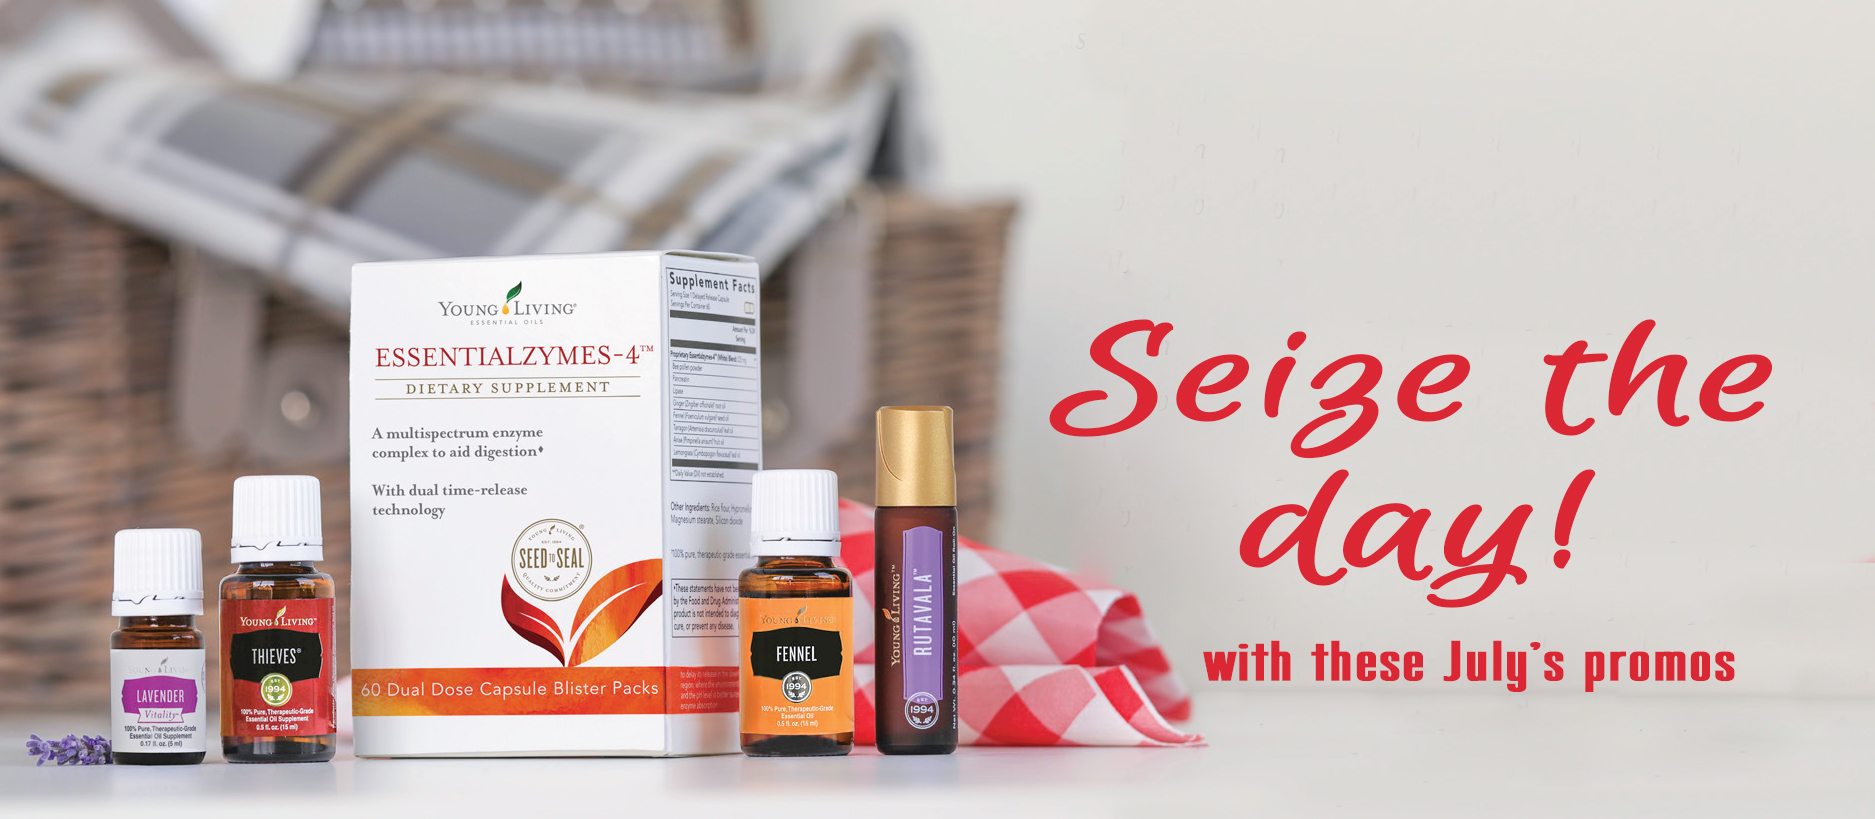 Young Living July Promo Essential Oily Life